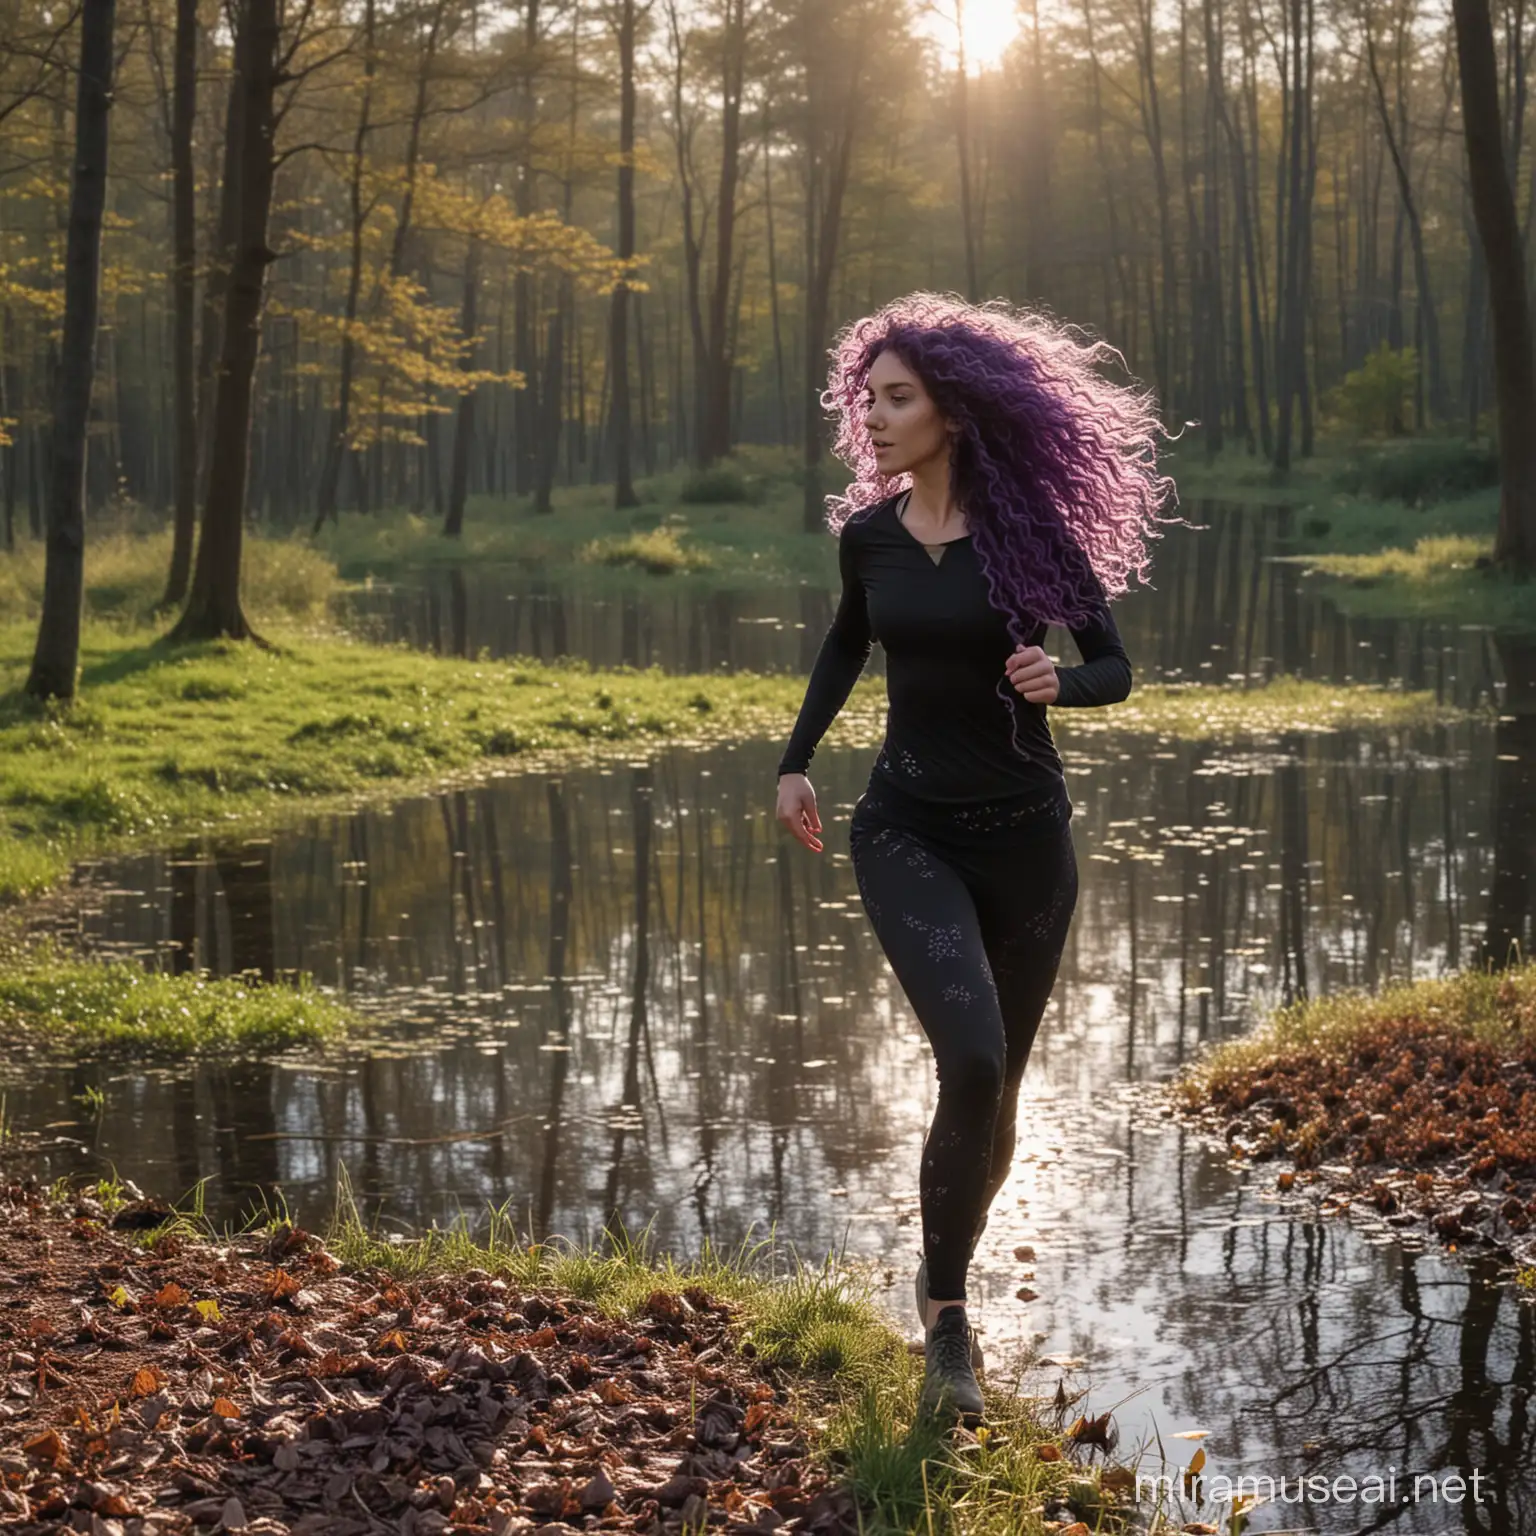 Running Black Unicorn in Spring Forest Enchanted Girl with Purple Hair